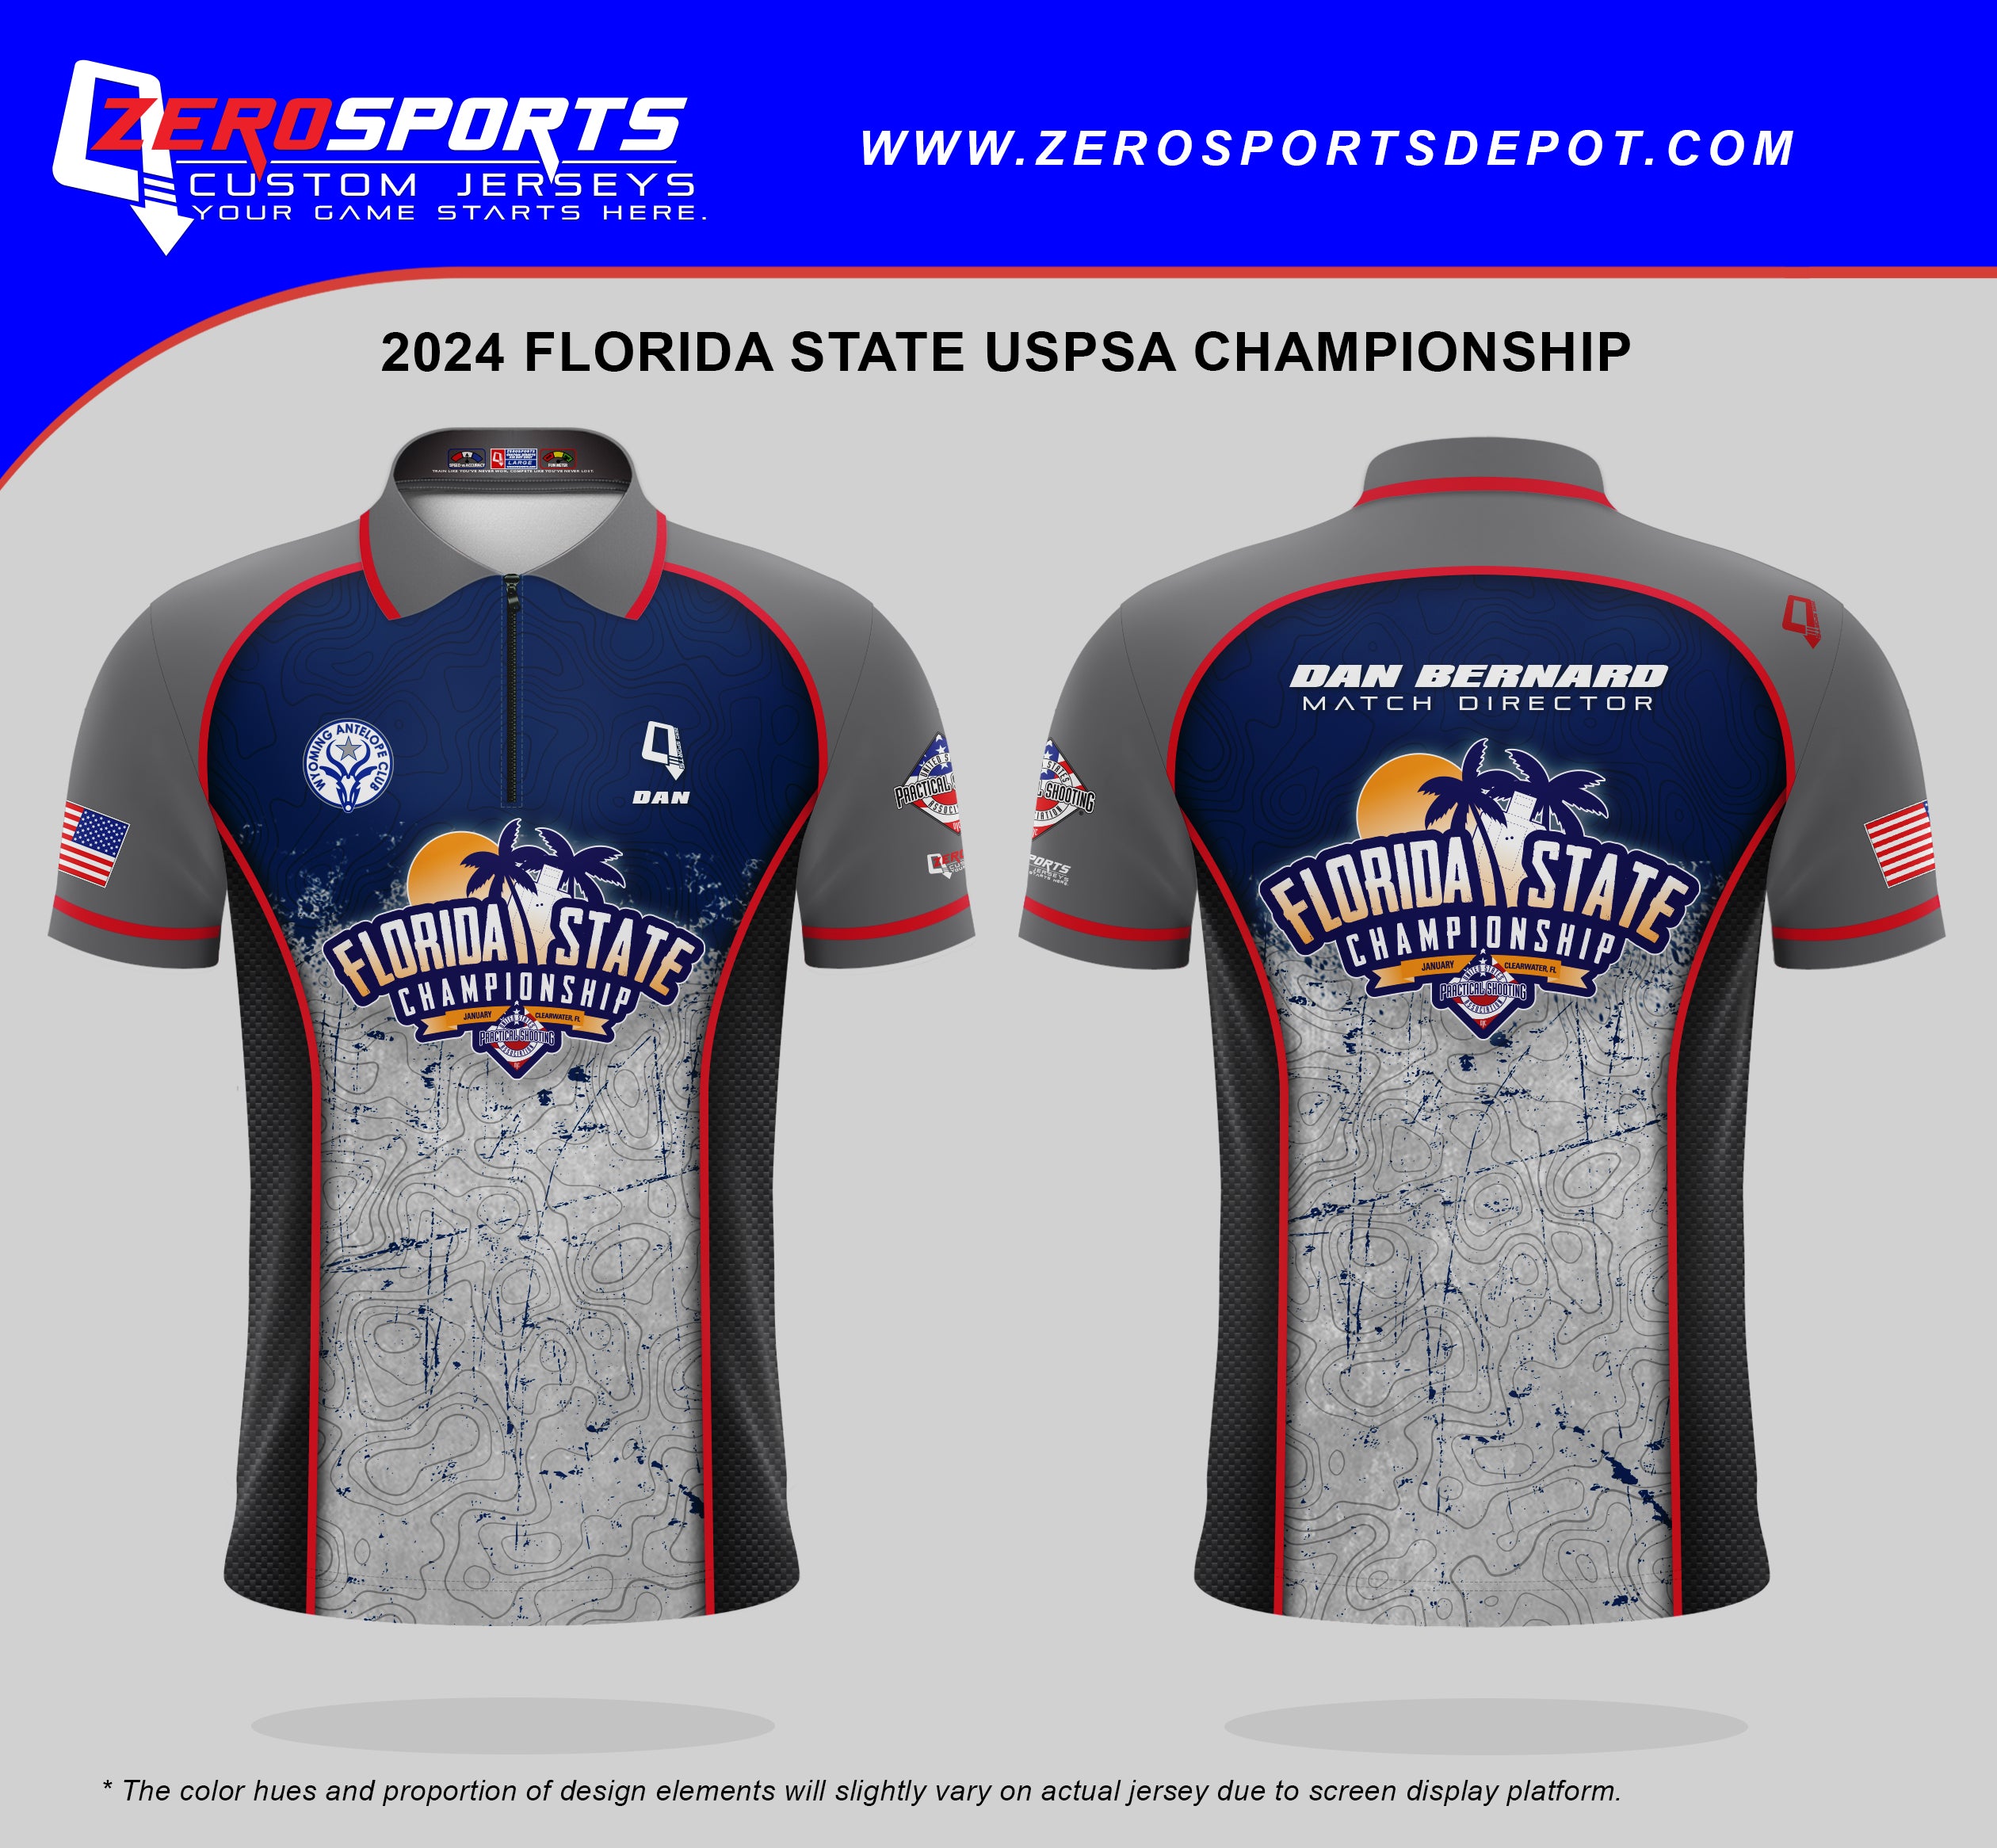 2024 WAC Florida State USPSA Championship Match Jersey  **All orders after 12/15/2023 will be shipped directly to your address after the match.